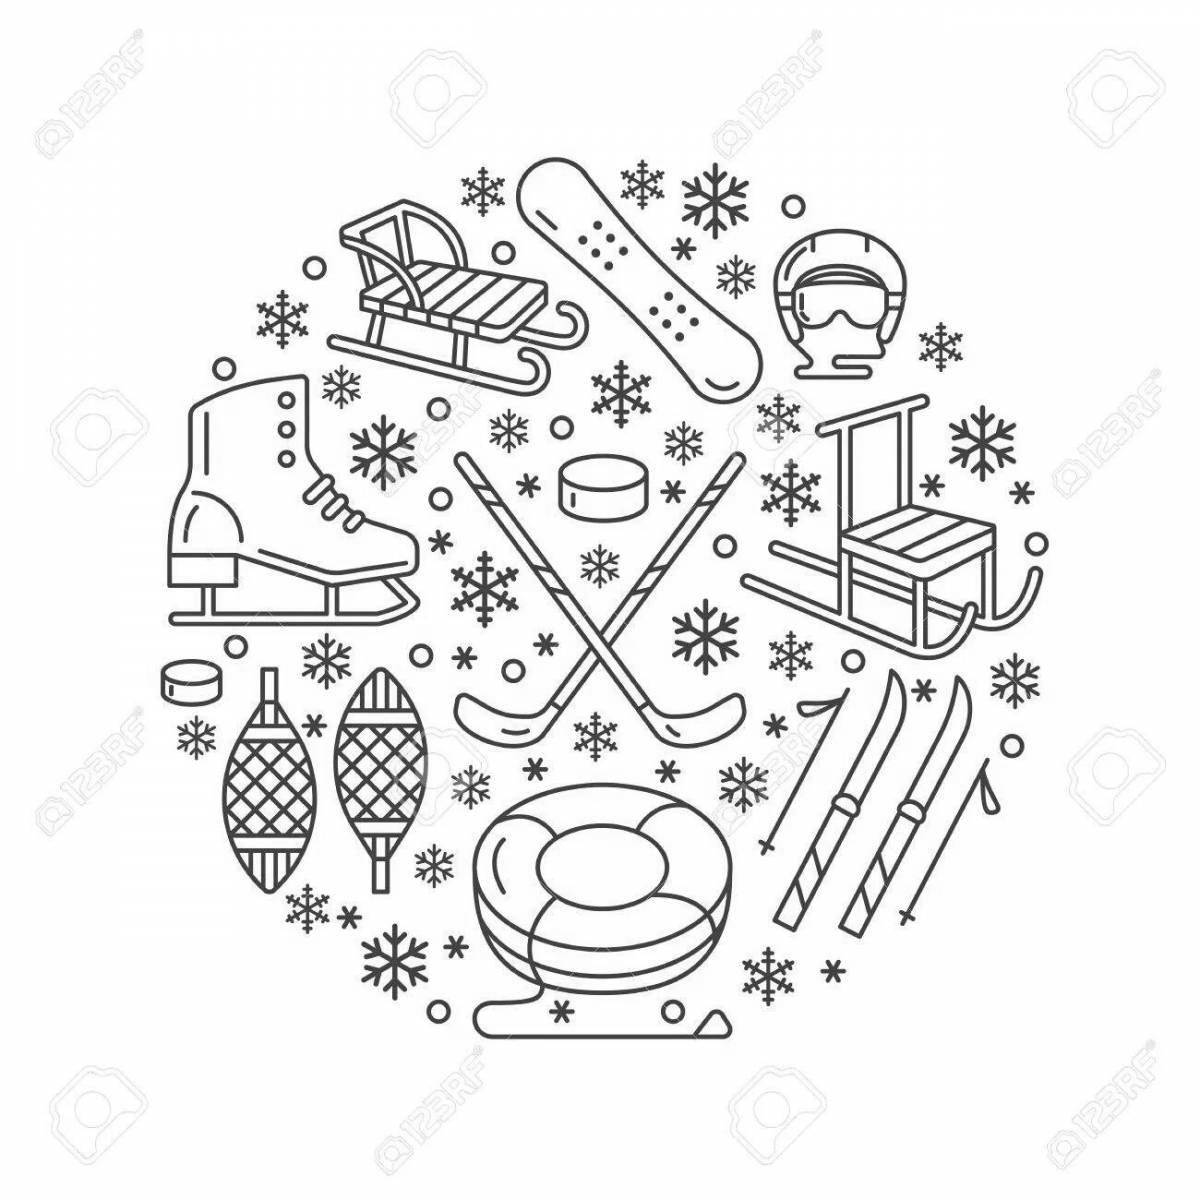 Playful coloring page for pipes